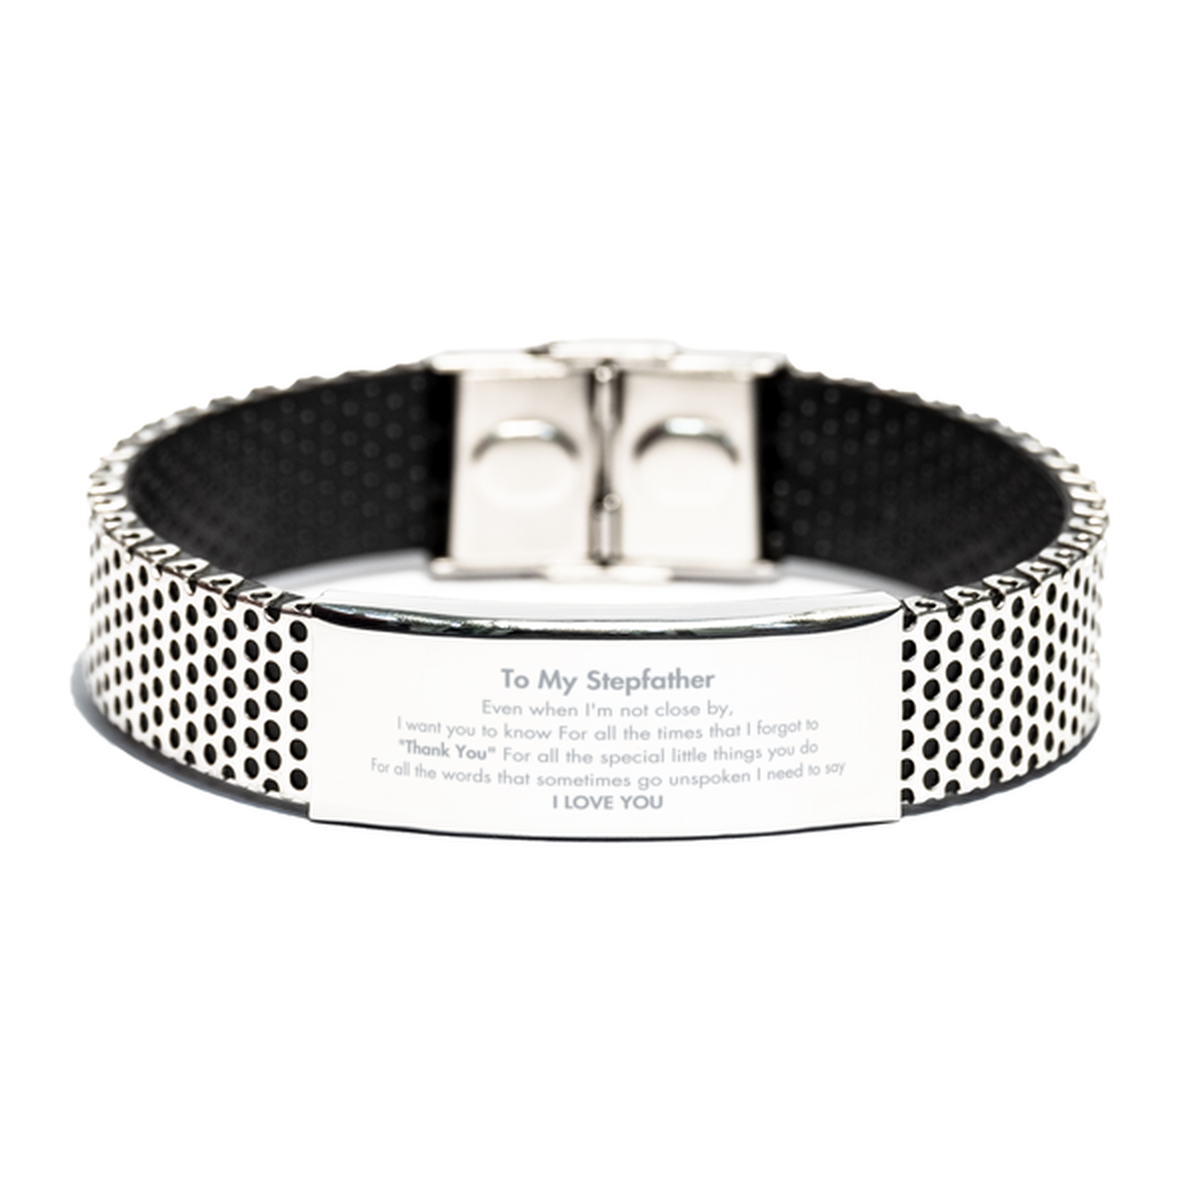 Thank You Gifts for Stepfather, Keepsake Stainless Steel Bracelet Gifts for Stepfather Birthday Mother's day Father's Day Stepfather For all the words That sometimes go unspoken I need to say I LOVE YOU